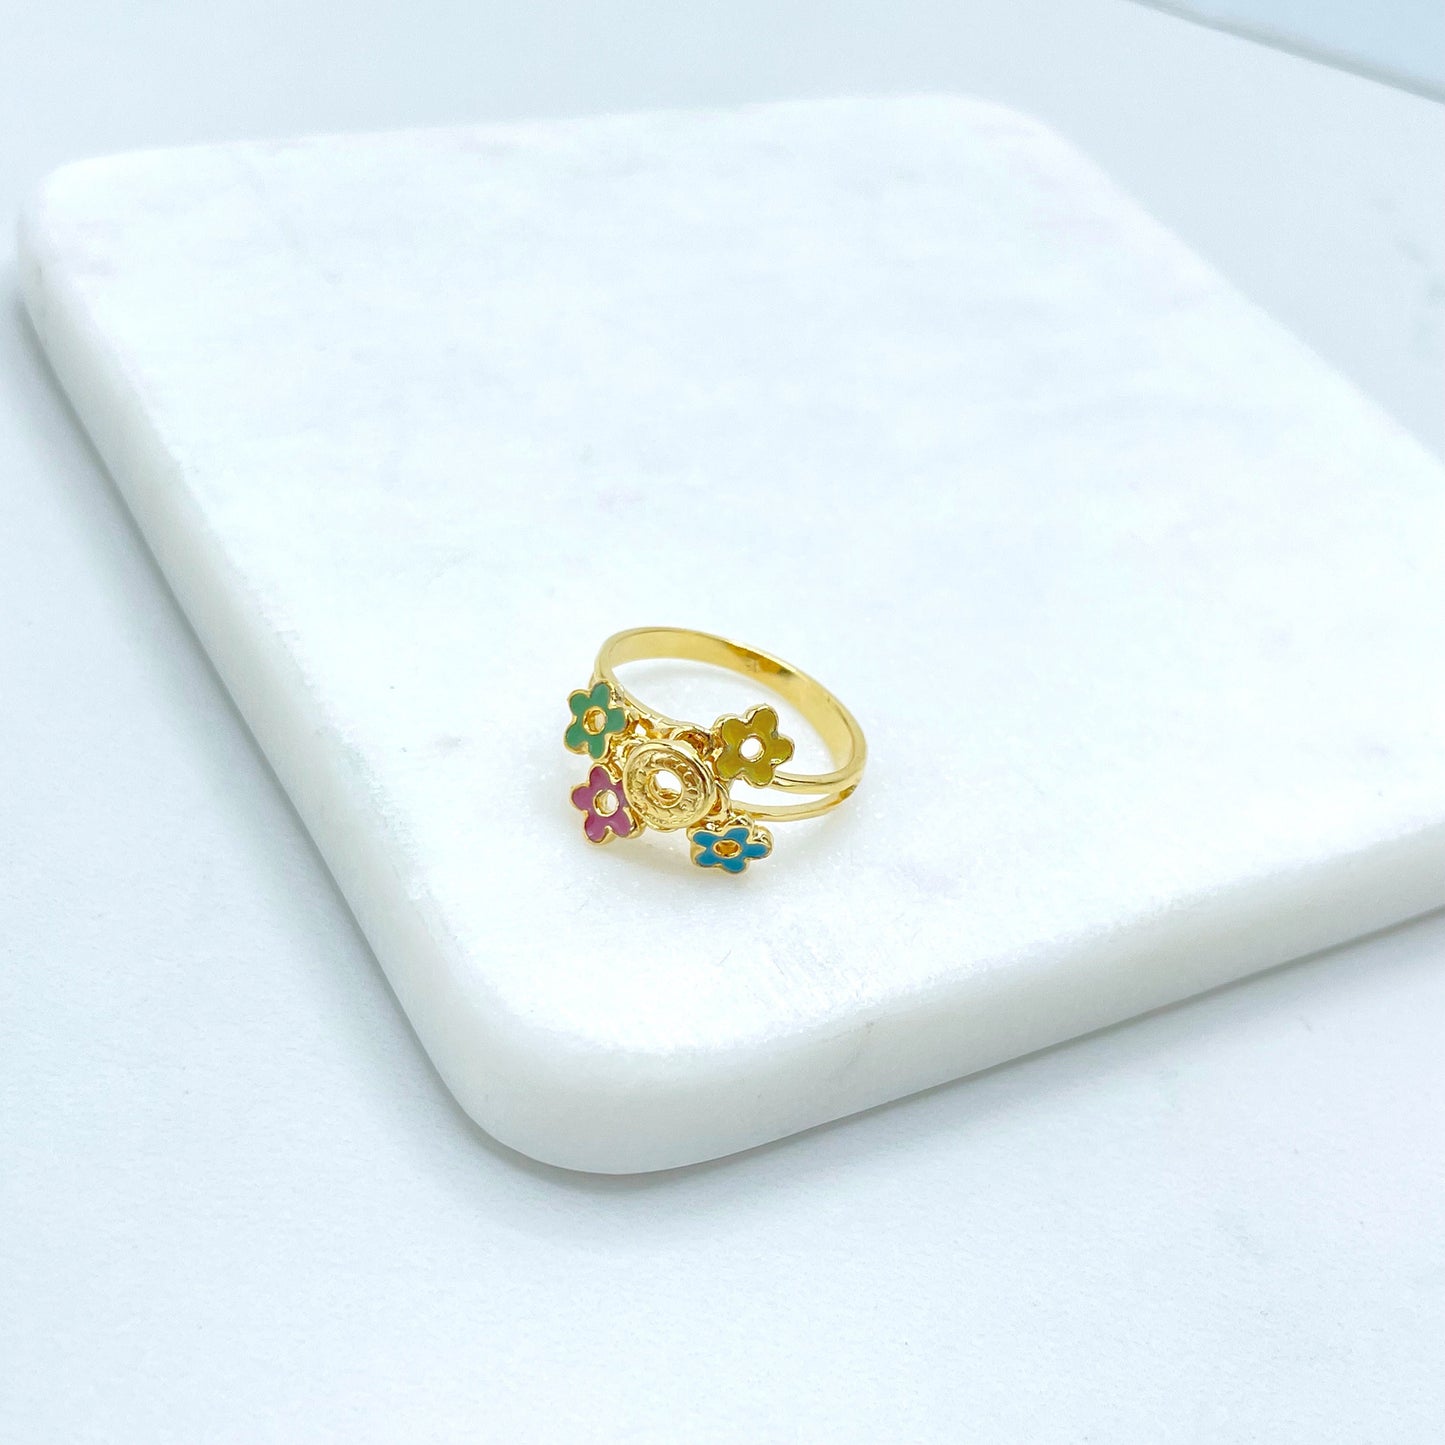 18k Gold Filled Colored Enamel Yellow, Blue, Green and Pink Flowers and Circle Ring, Wholesale Jewelry Making Supplies